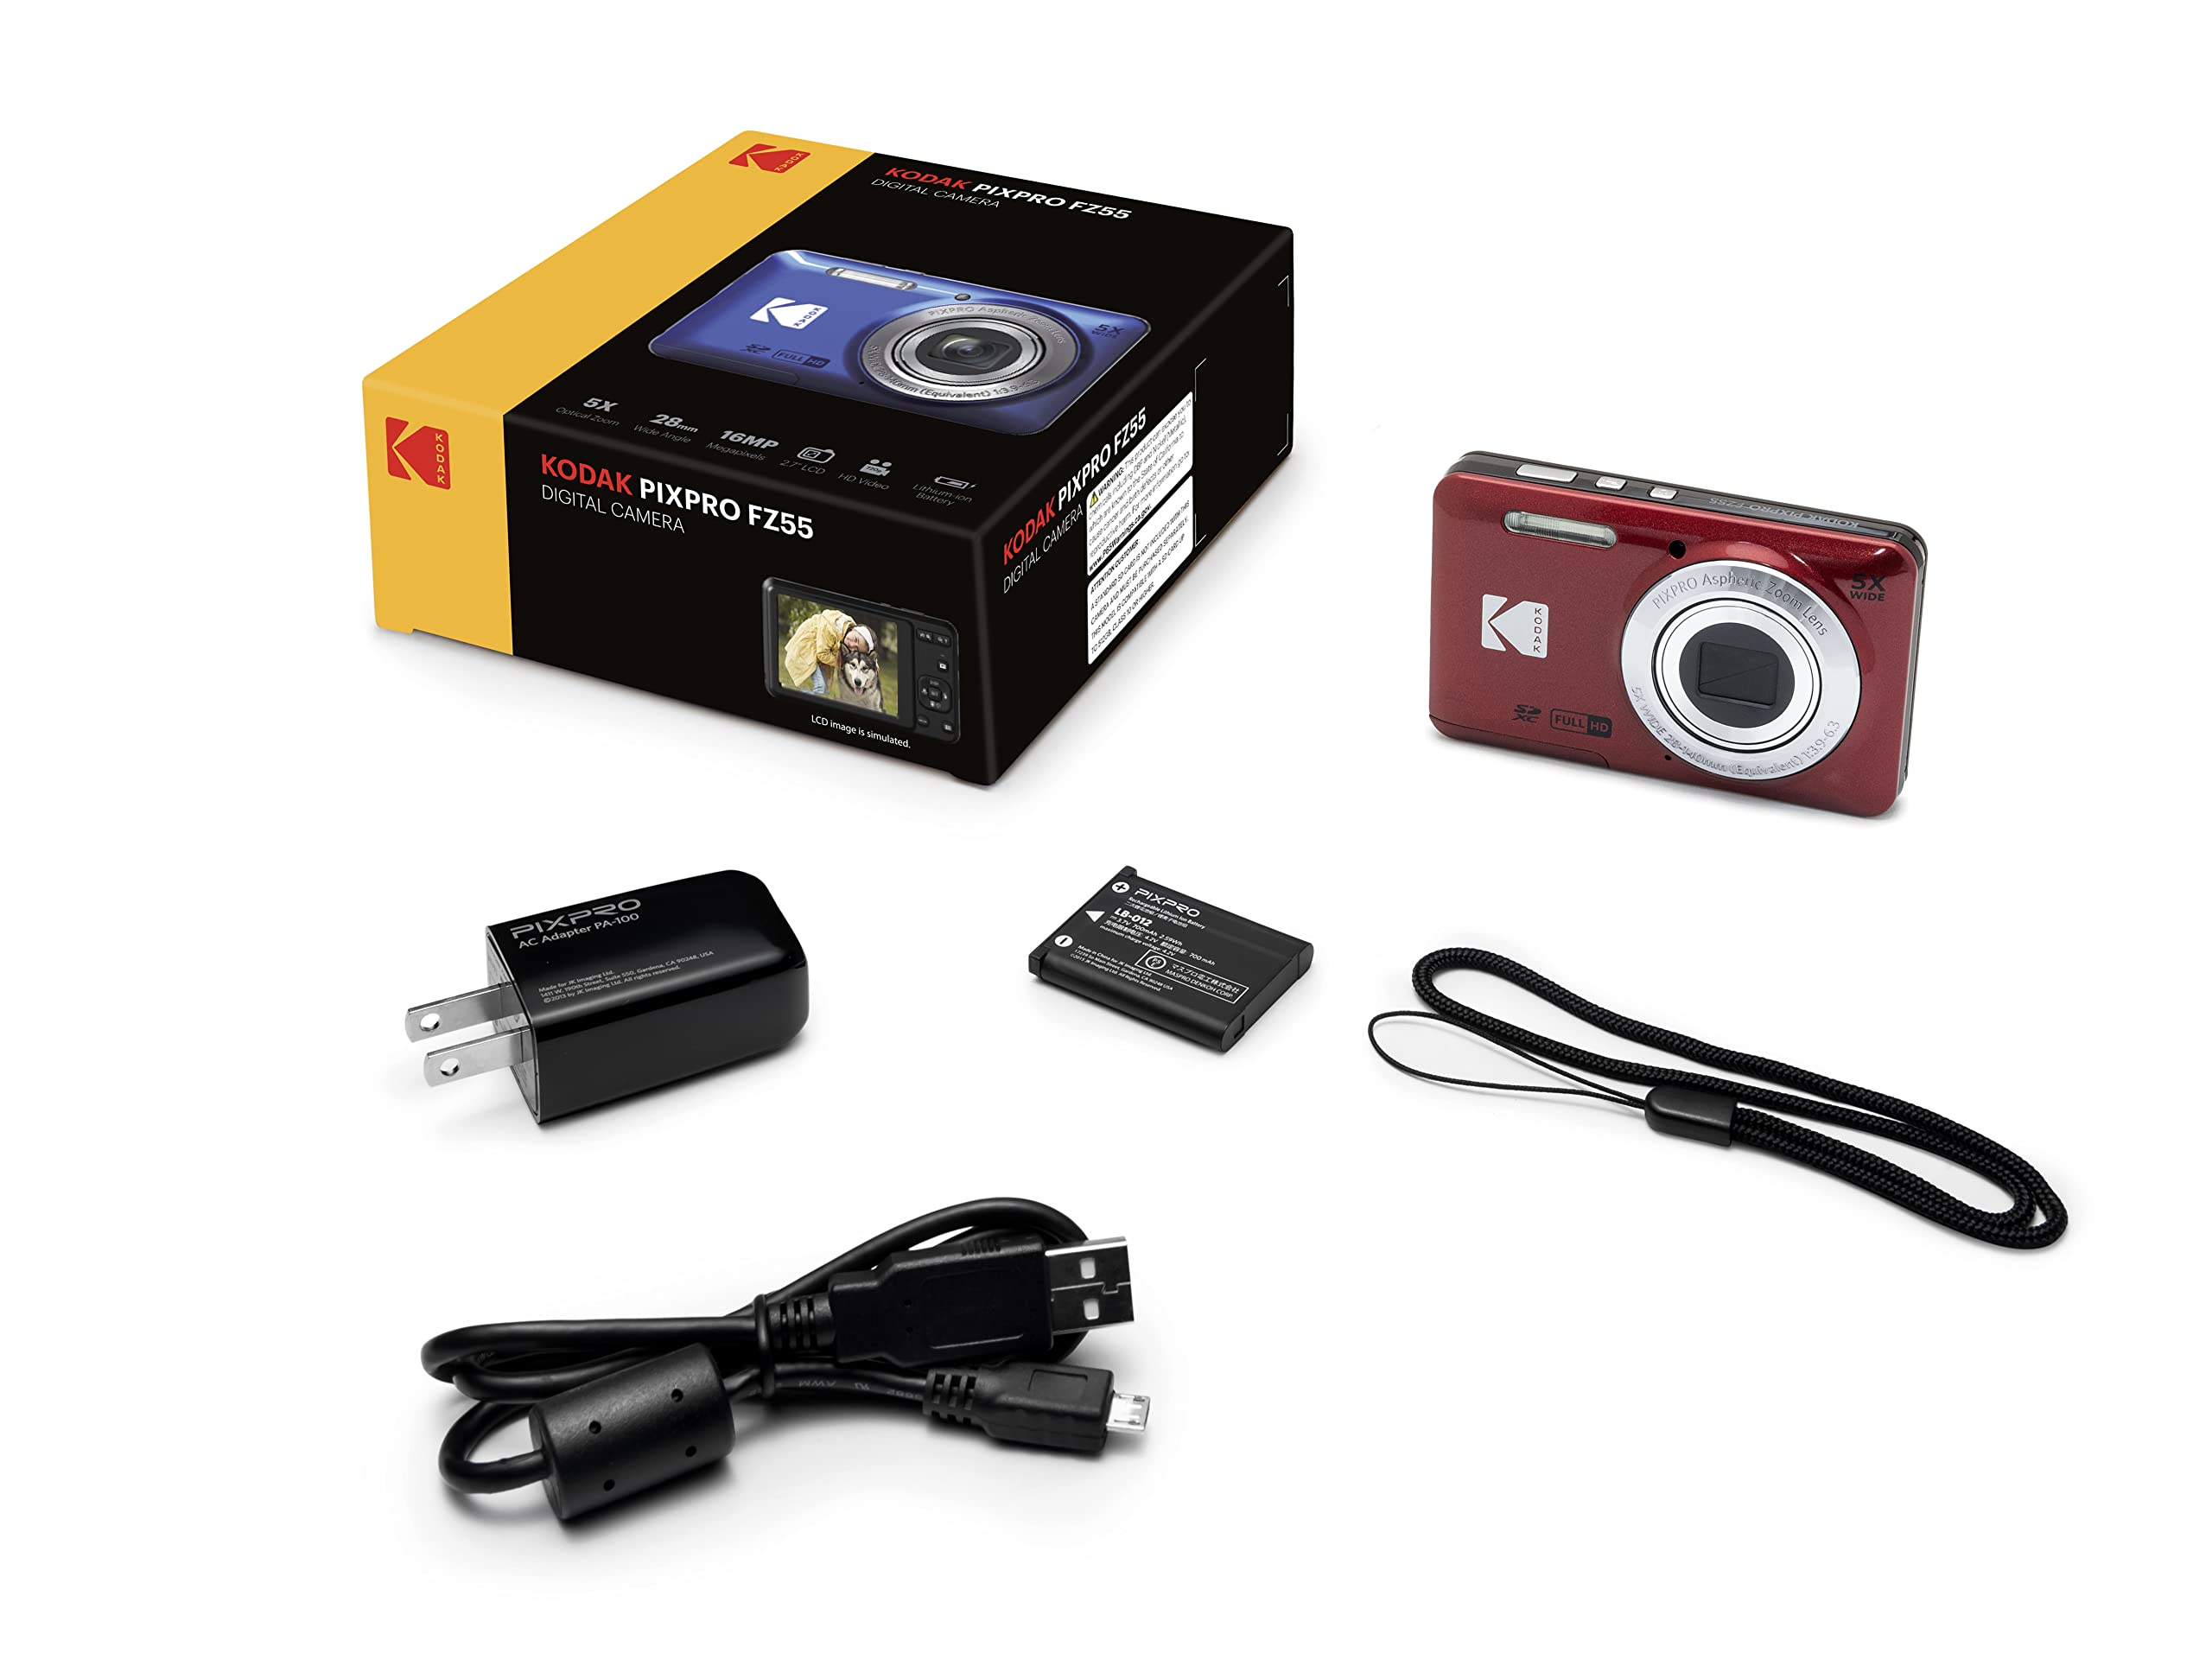 Kodak PIXPRO FZ55 Digital Camera (Red) + 32GB Memory Card + Point and Shoot Camera Case + Extendable Monopod + Lens Cleaning Pen + LCD Screen Protectors + Table Top Tripod – Ultimate Bundle